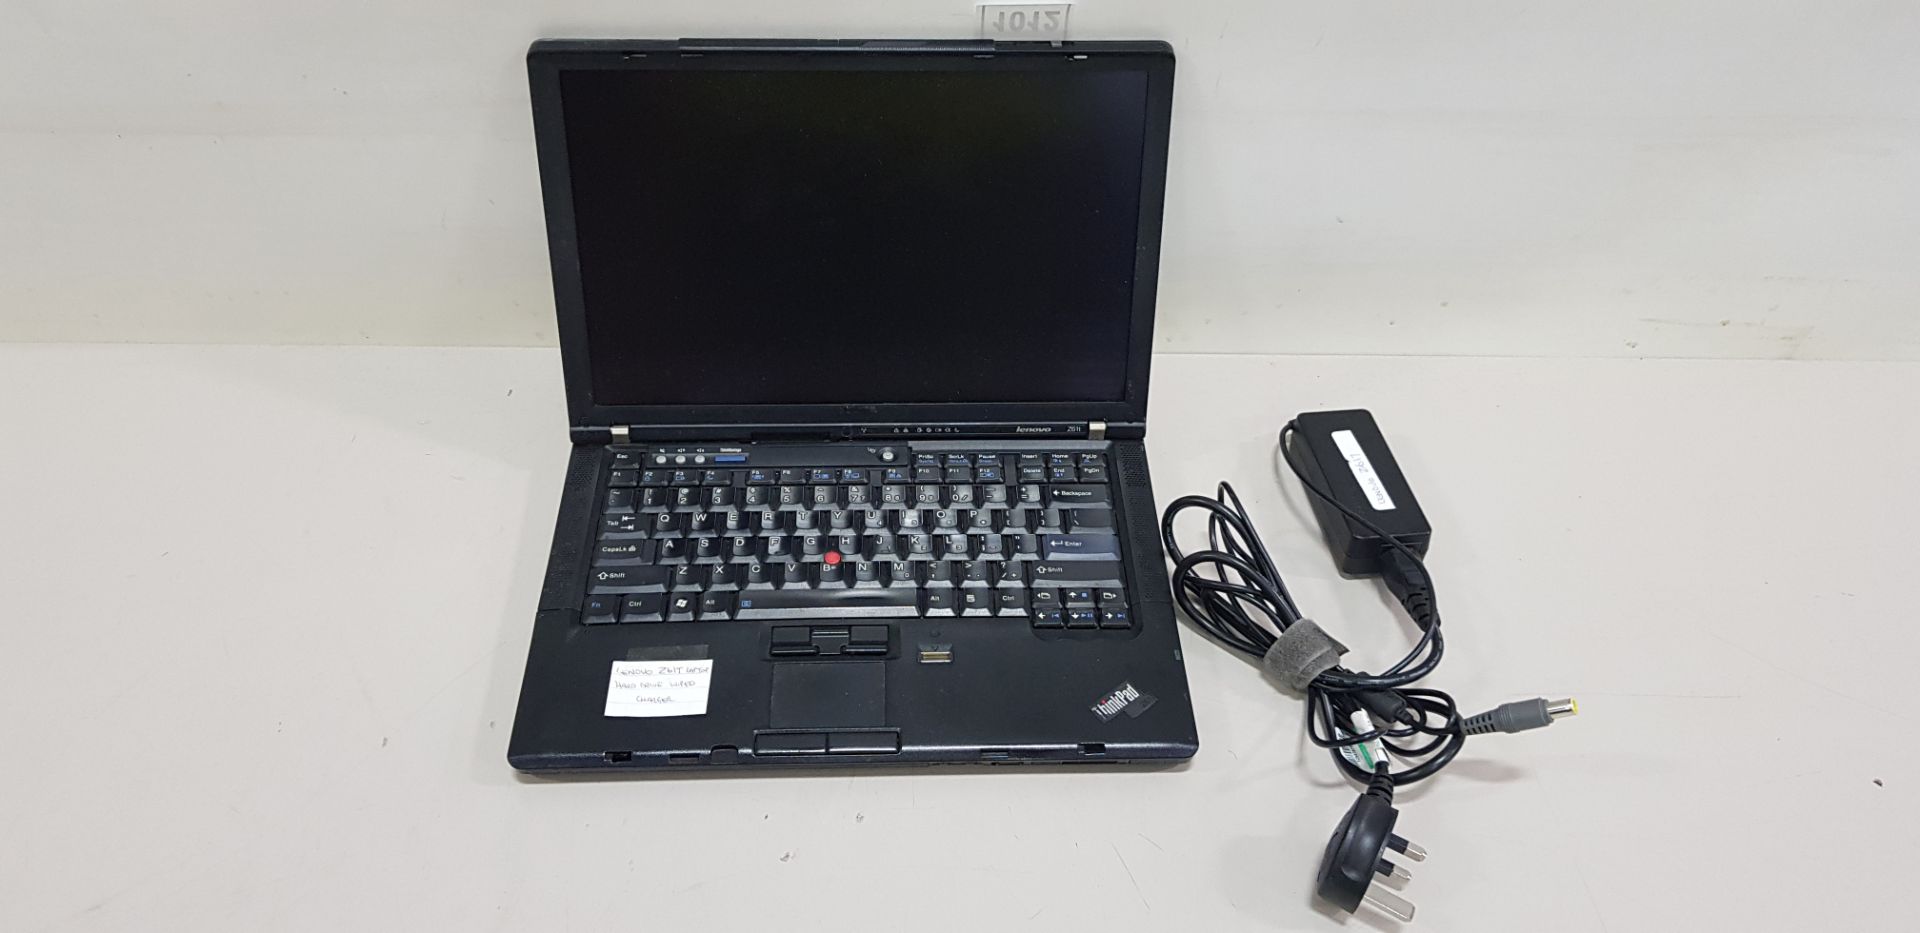 LENOVO Z61 T LAPTOP - HARD DRIVE WIPED - COMES WITH CHARGER